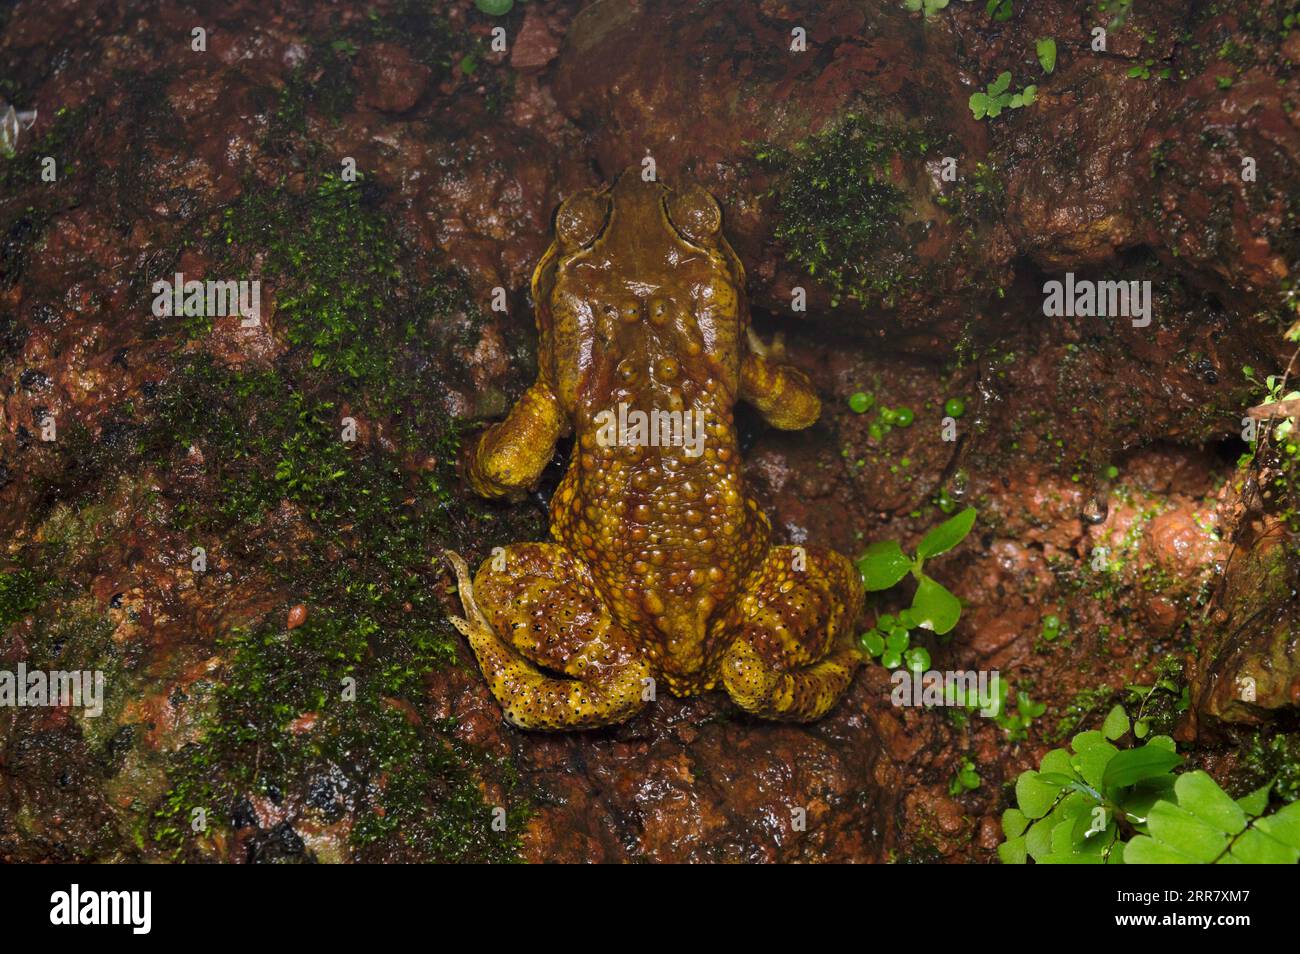 Dorsal of Amboli toad, Xanthophryne tigerina, Endemic to western ghats, Habitat - Tropical and subtropical rainforests Stock Photo